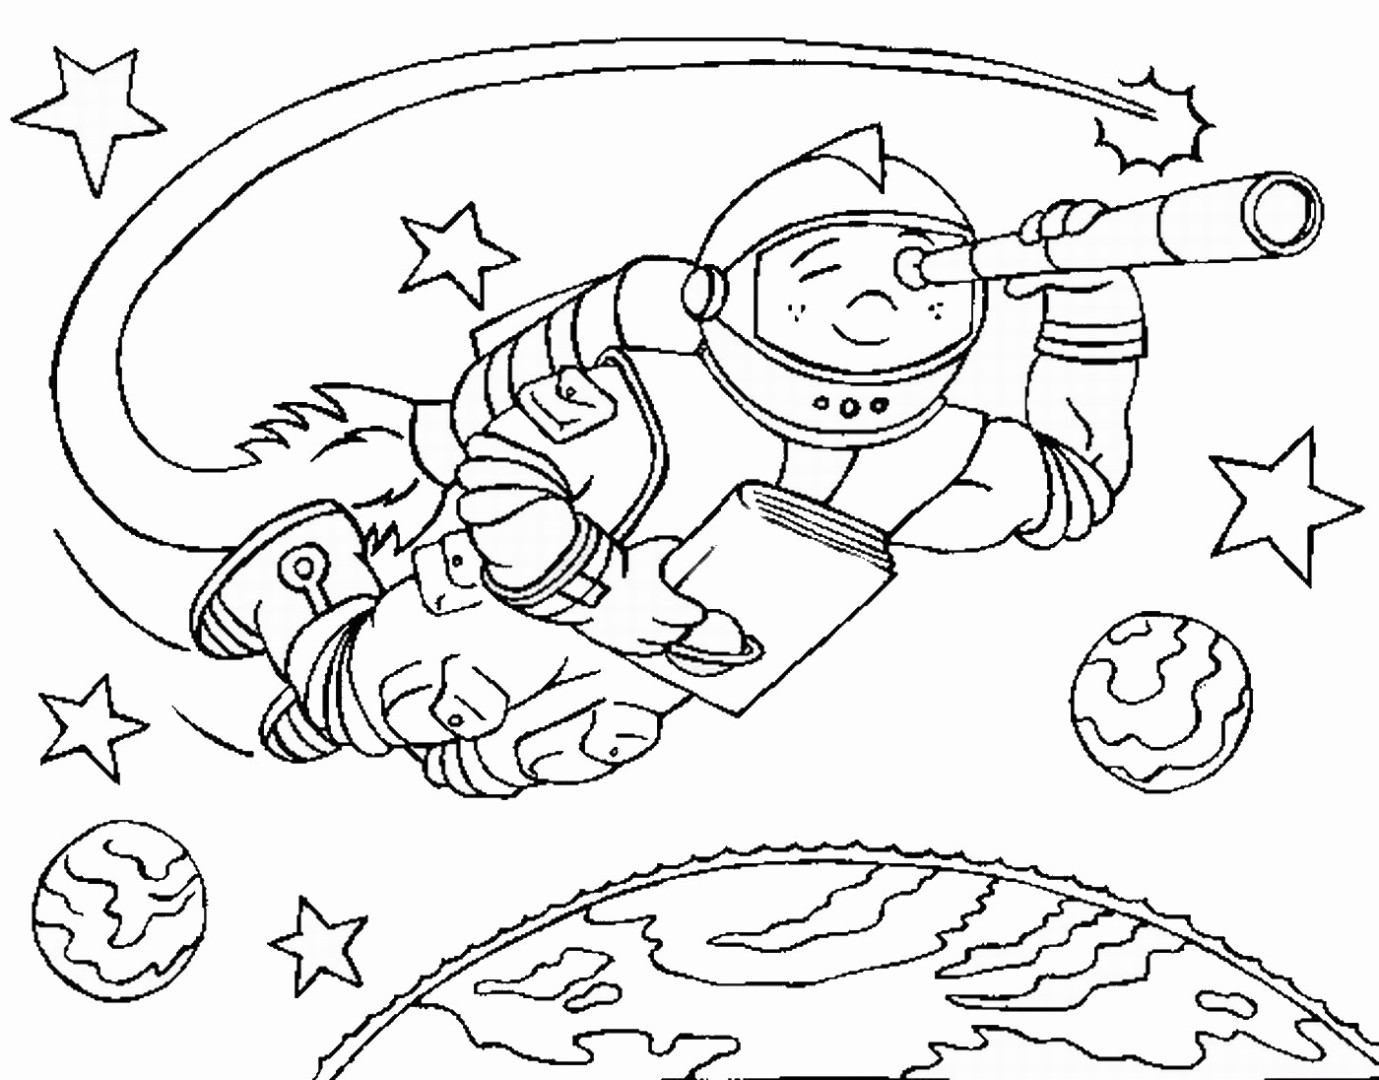 Coloring book incredible space adventure for children 4-5 years old